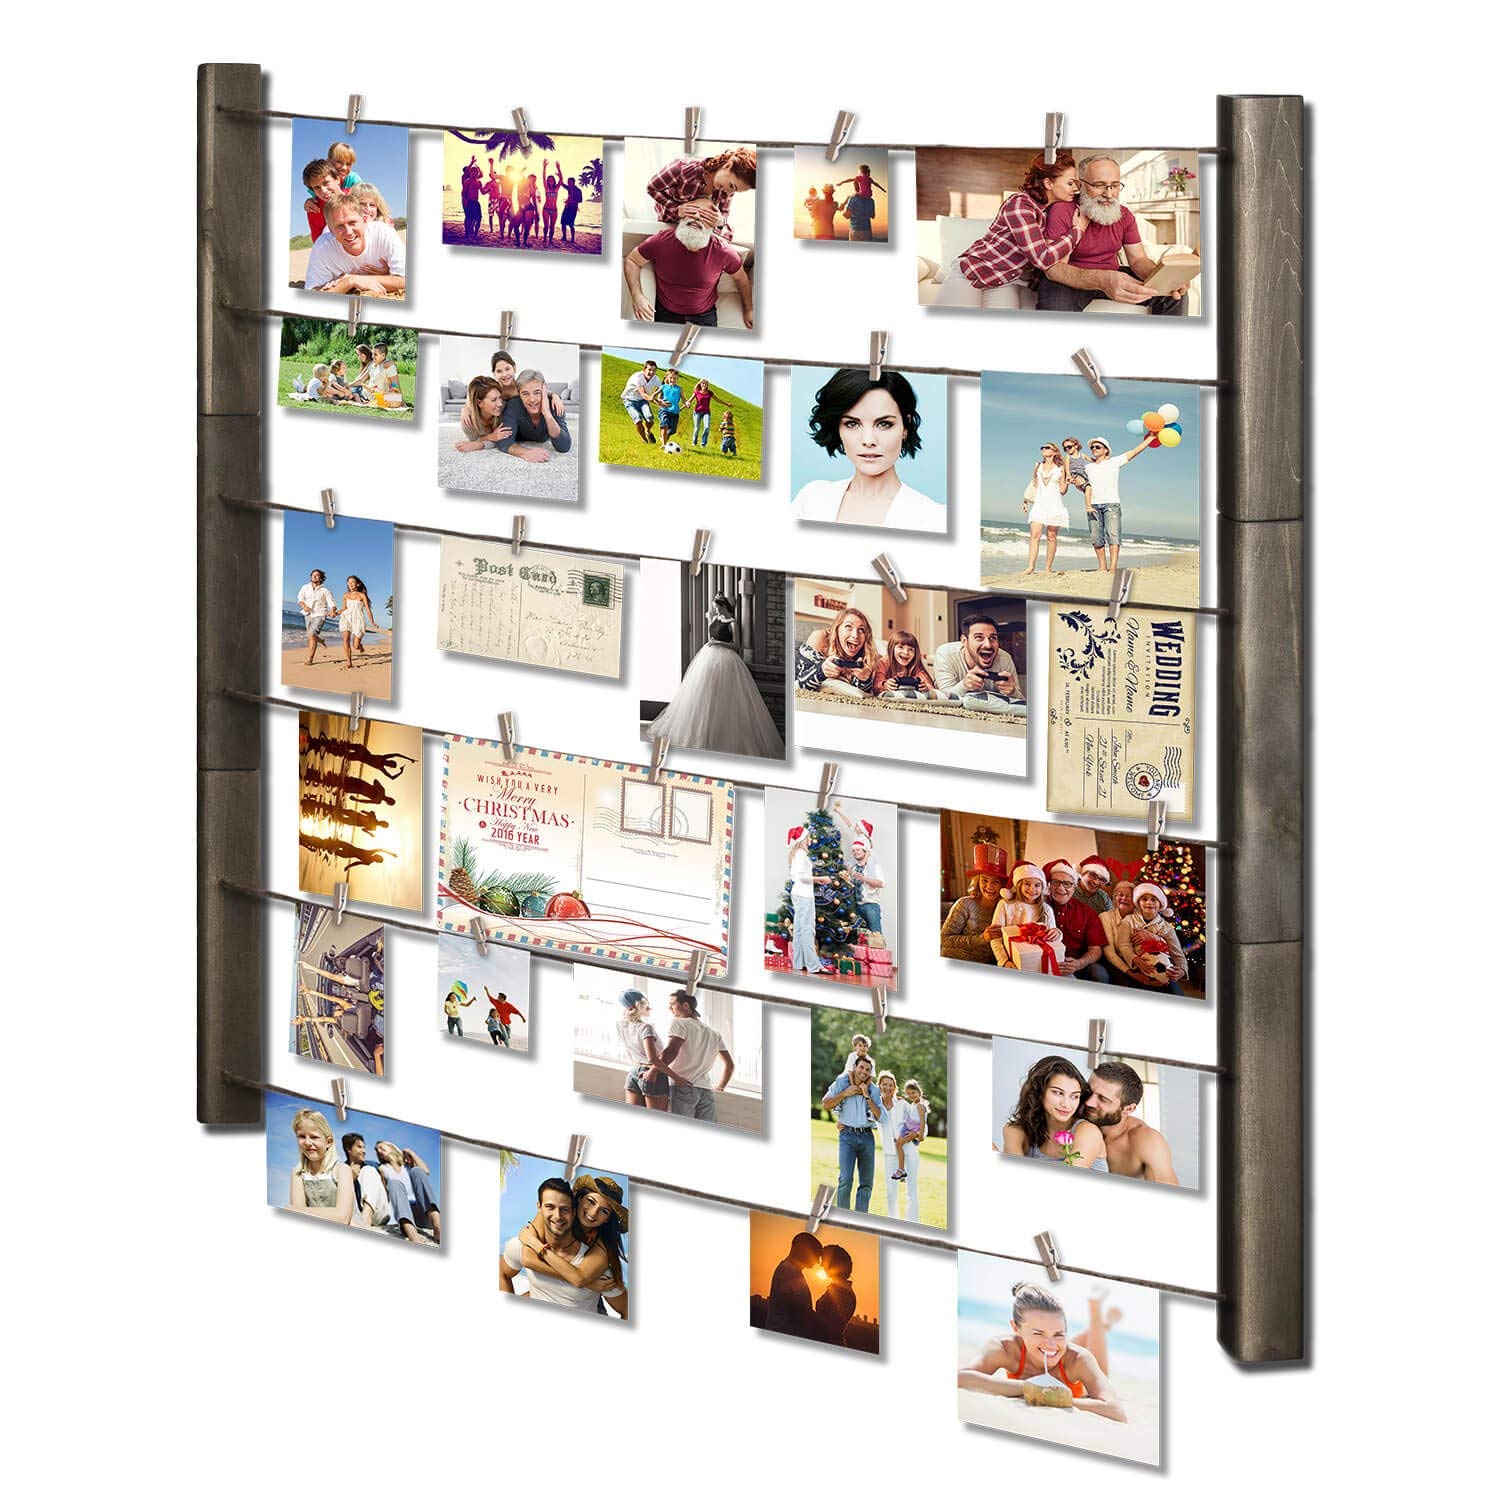 SRIWATANA Wood Picture Frame Collage for Multi Photo Display Wall Decor 30'' x 26 with 36 Clips - Vertical & Horizontal Display(Weathered Grey)